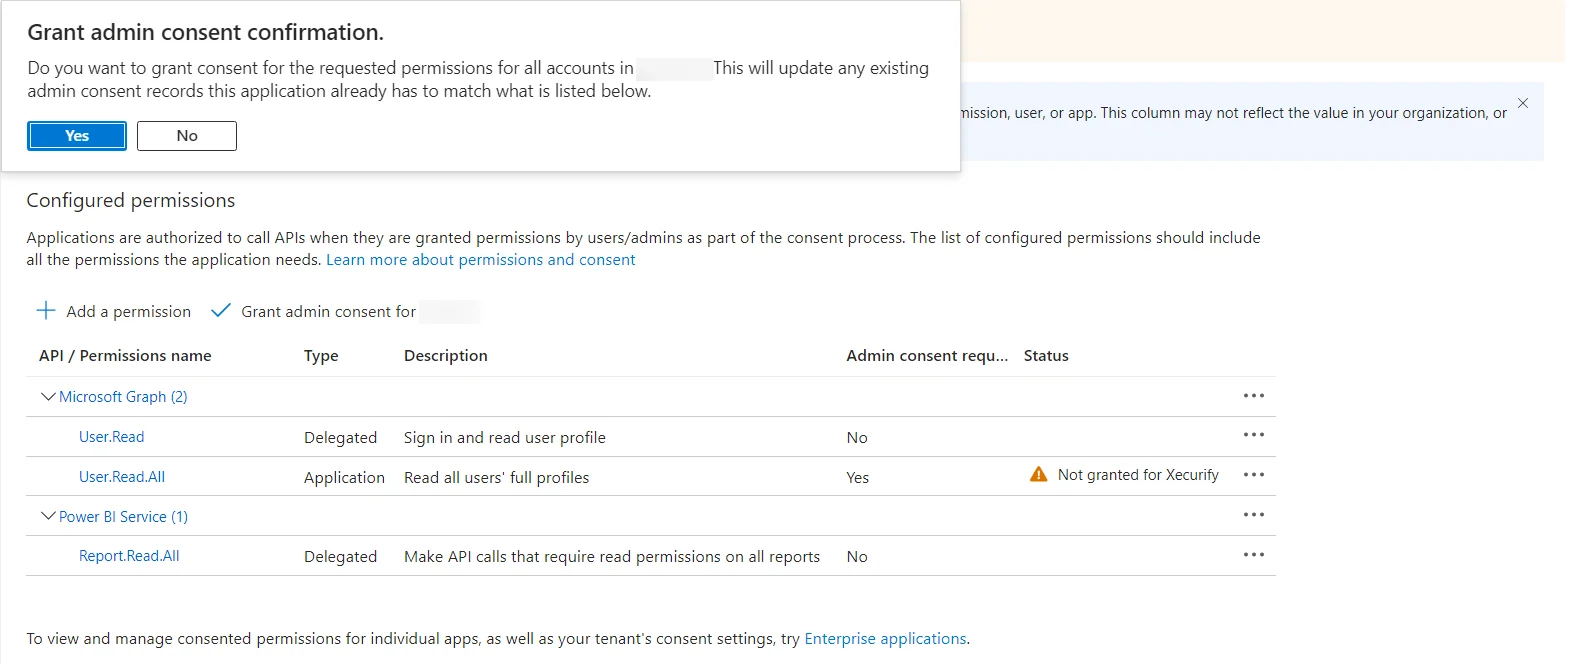 DNN Power BI Embed with row level security | Grant admin concent